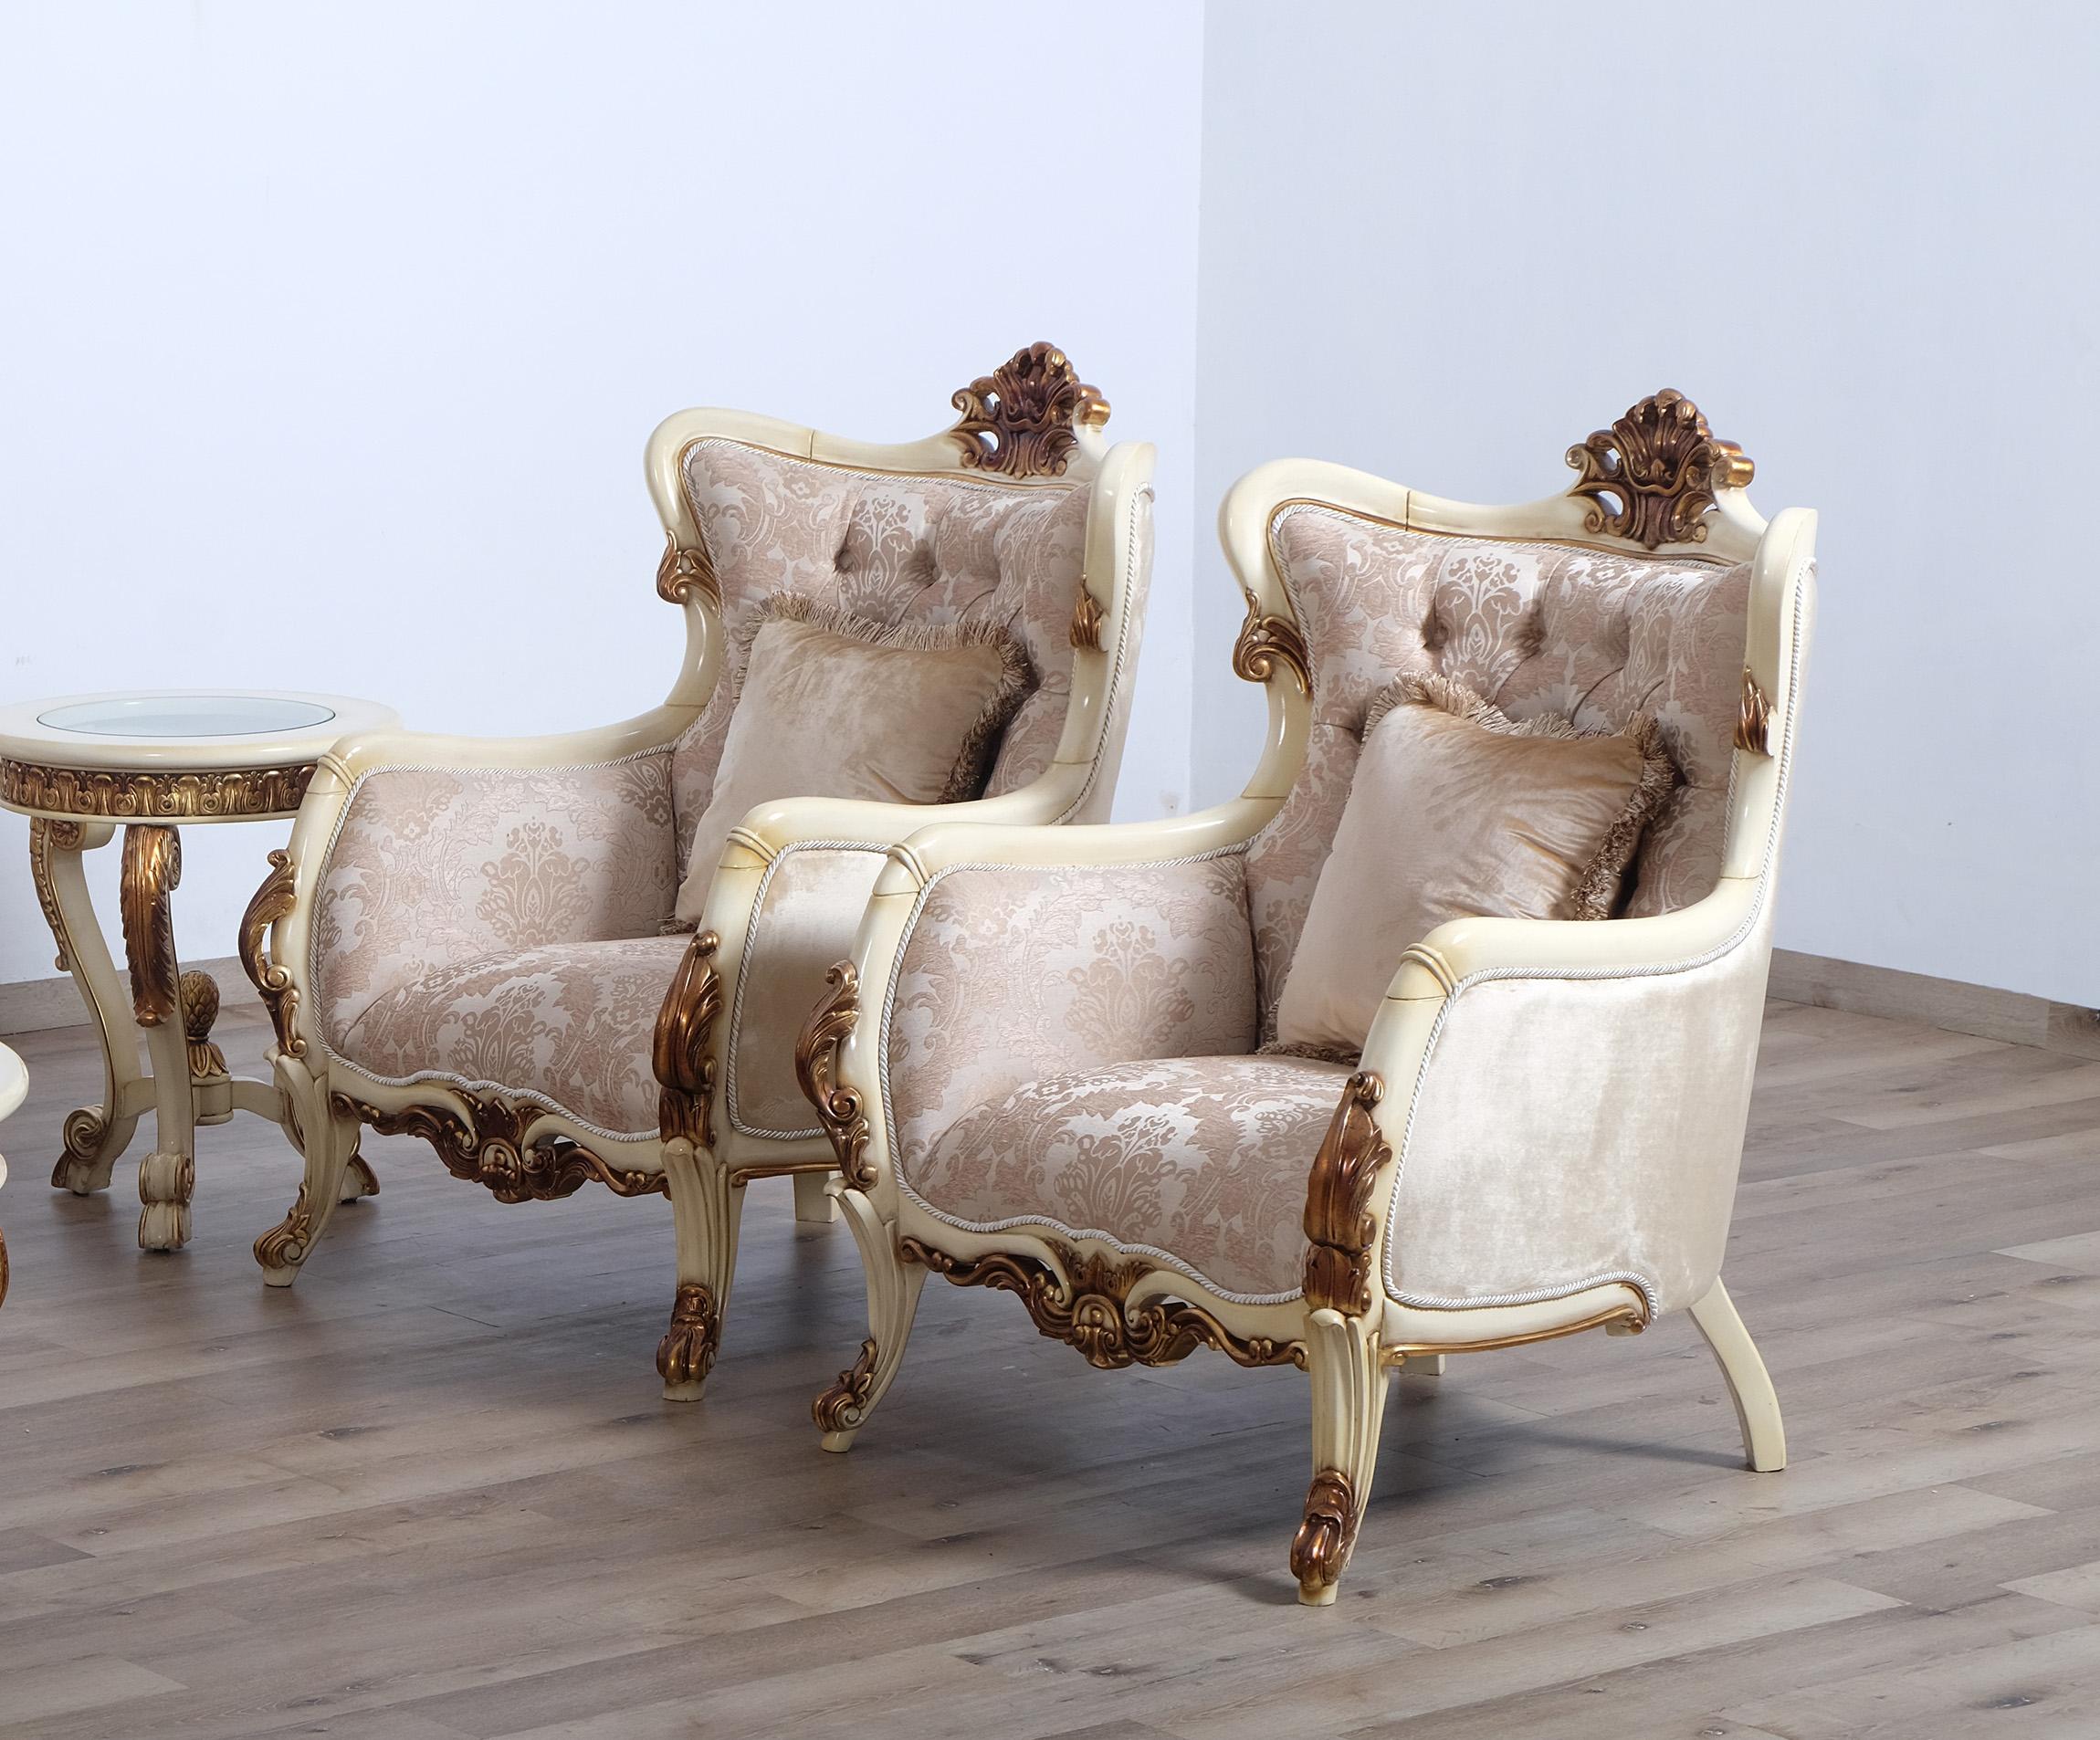 Classic, Traditional Arm Chair Set VERONICA 47075-C-Set-2 in Antique, Gold, Beige Fabric